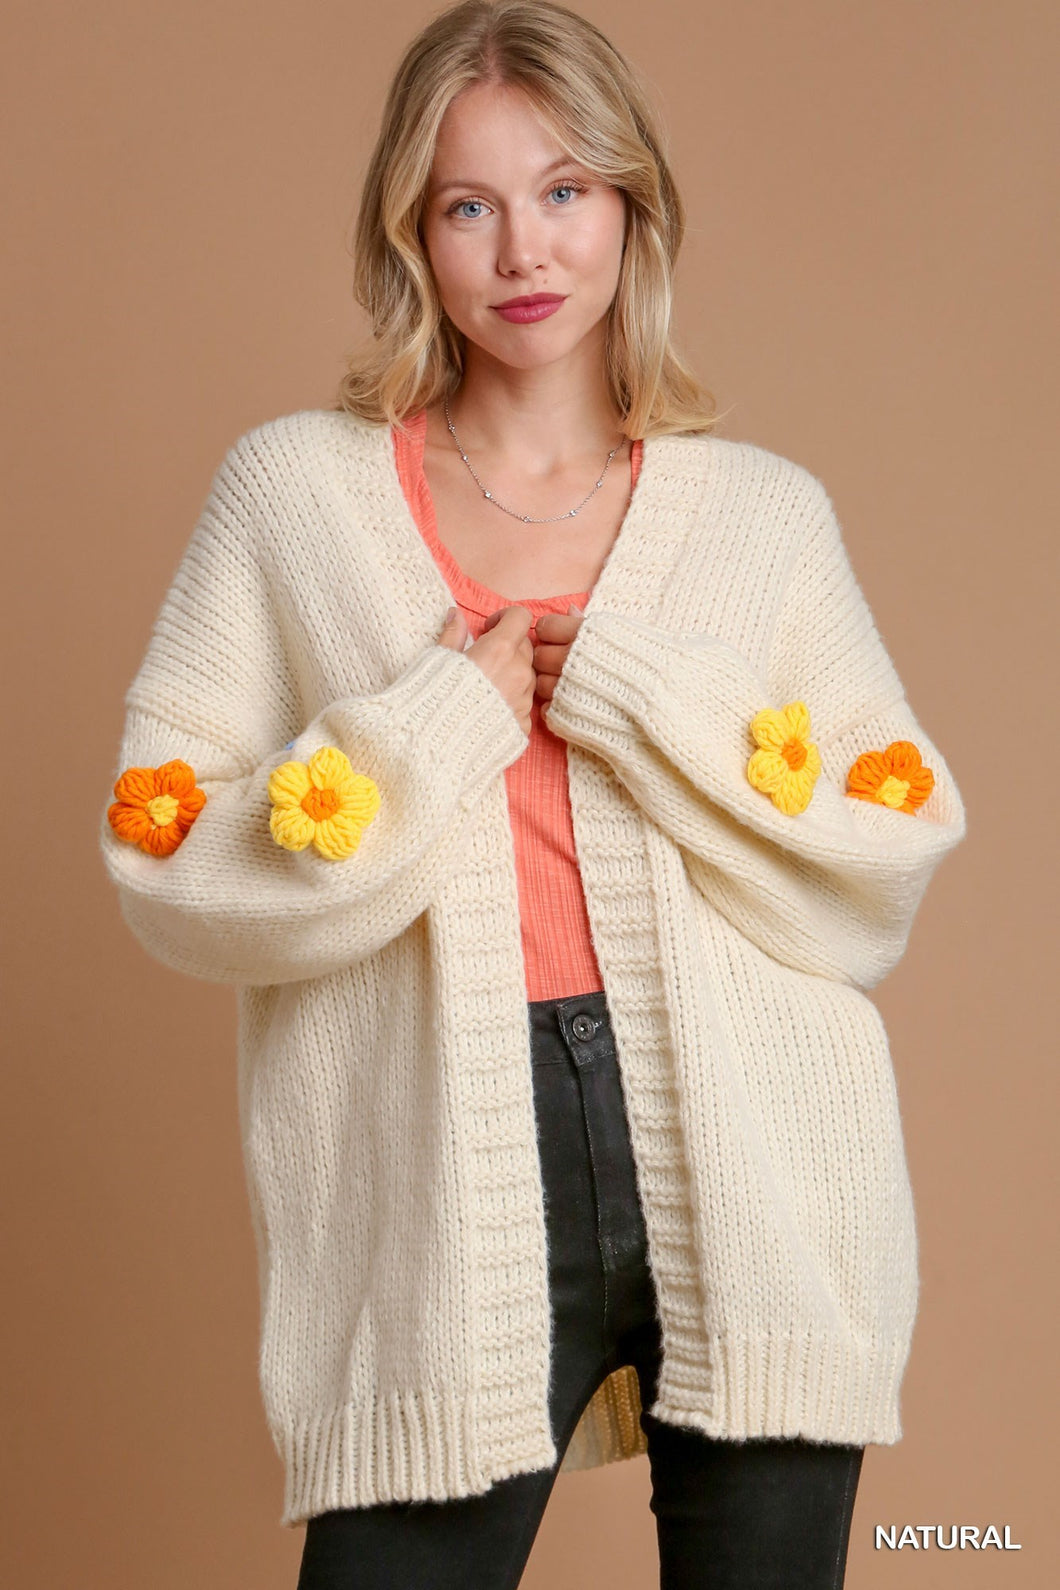 All Natural Flower Sweater